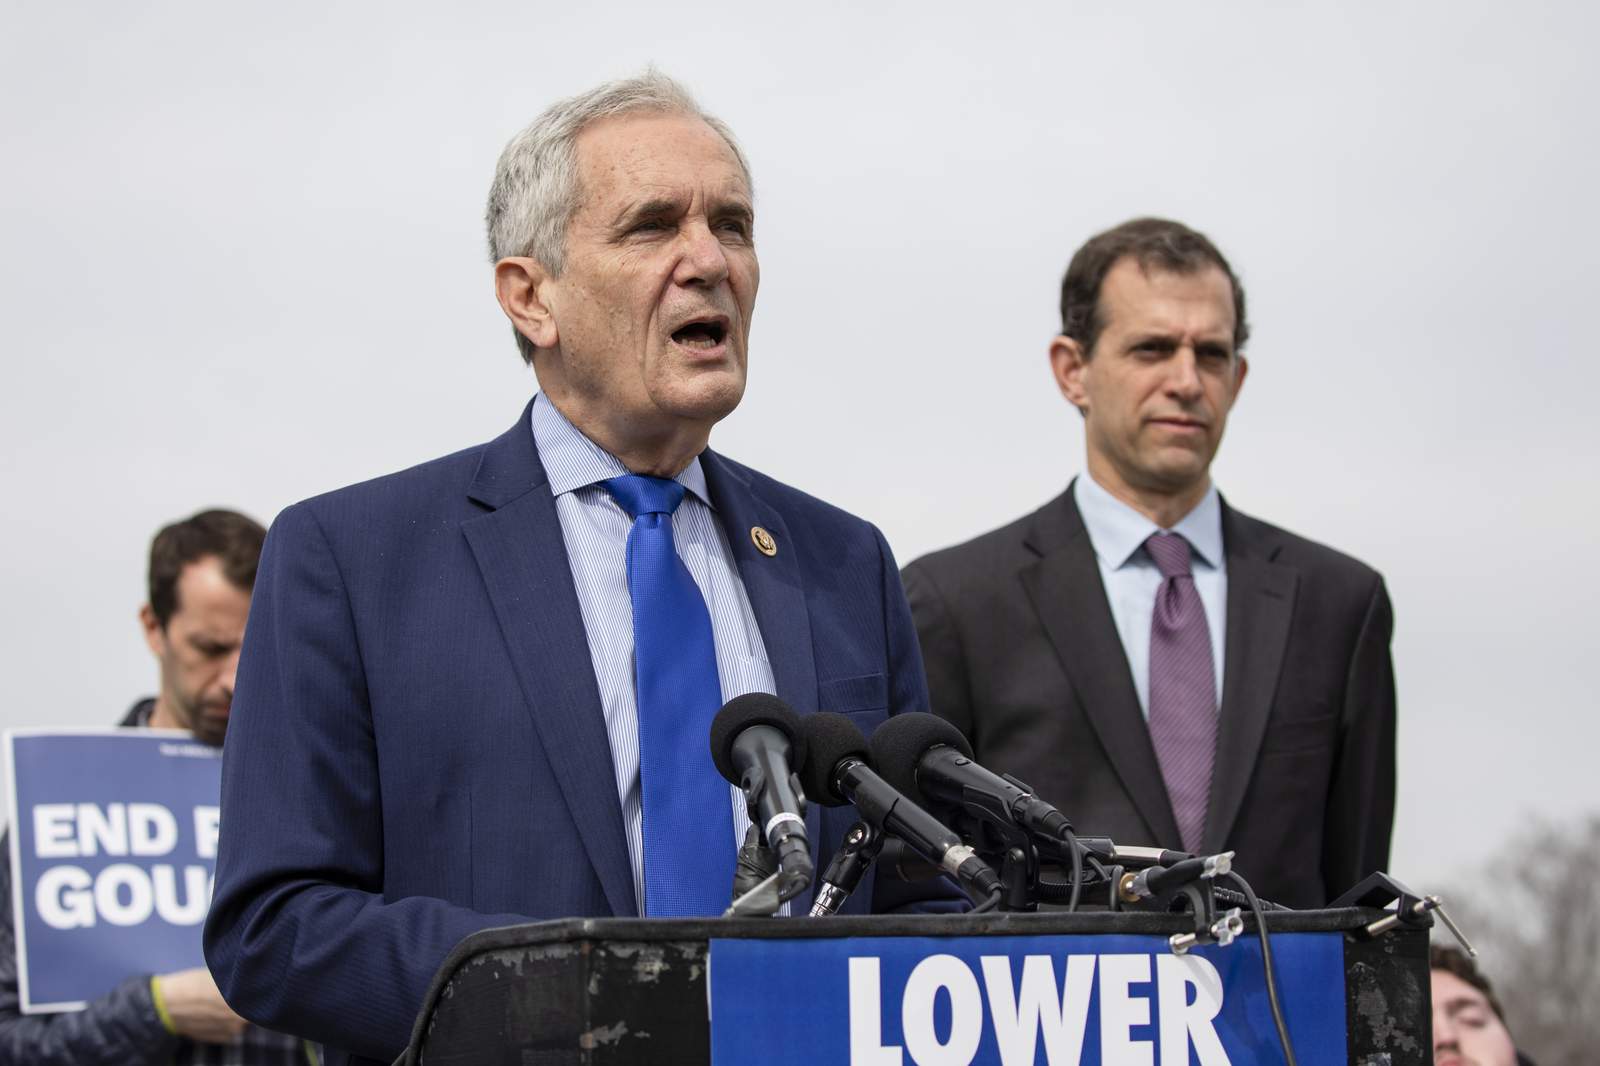 ‘It was a mistake,’: Texas State University says after Rep. Doggett’s video omitted from program